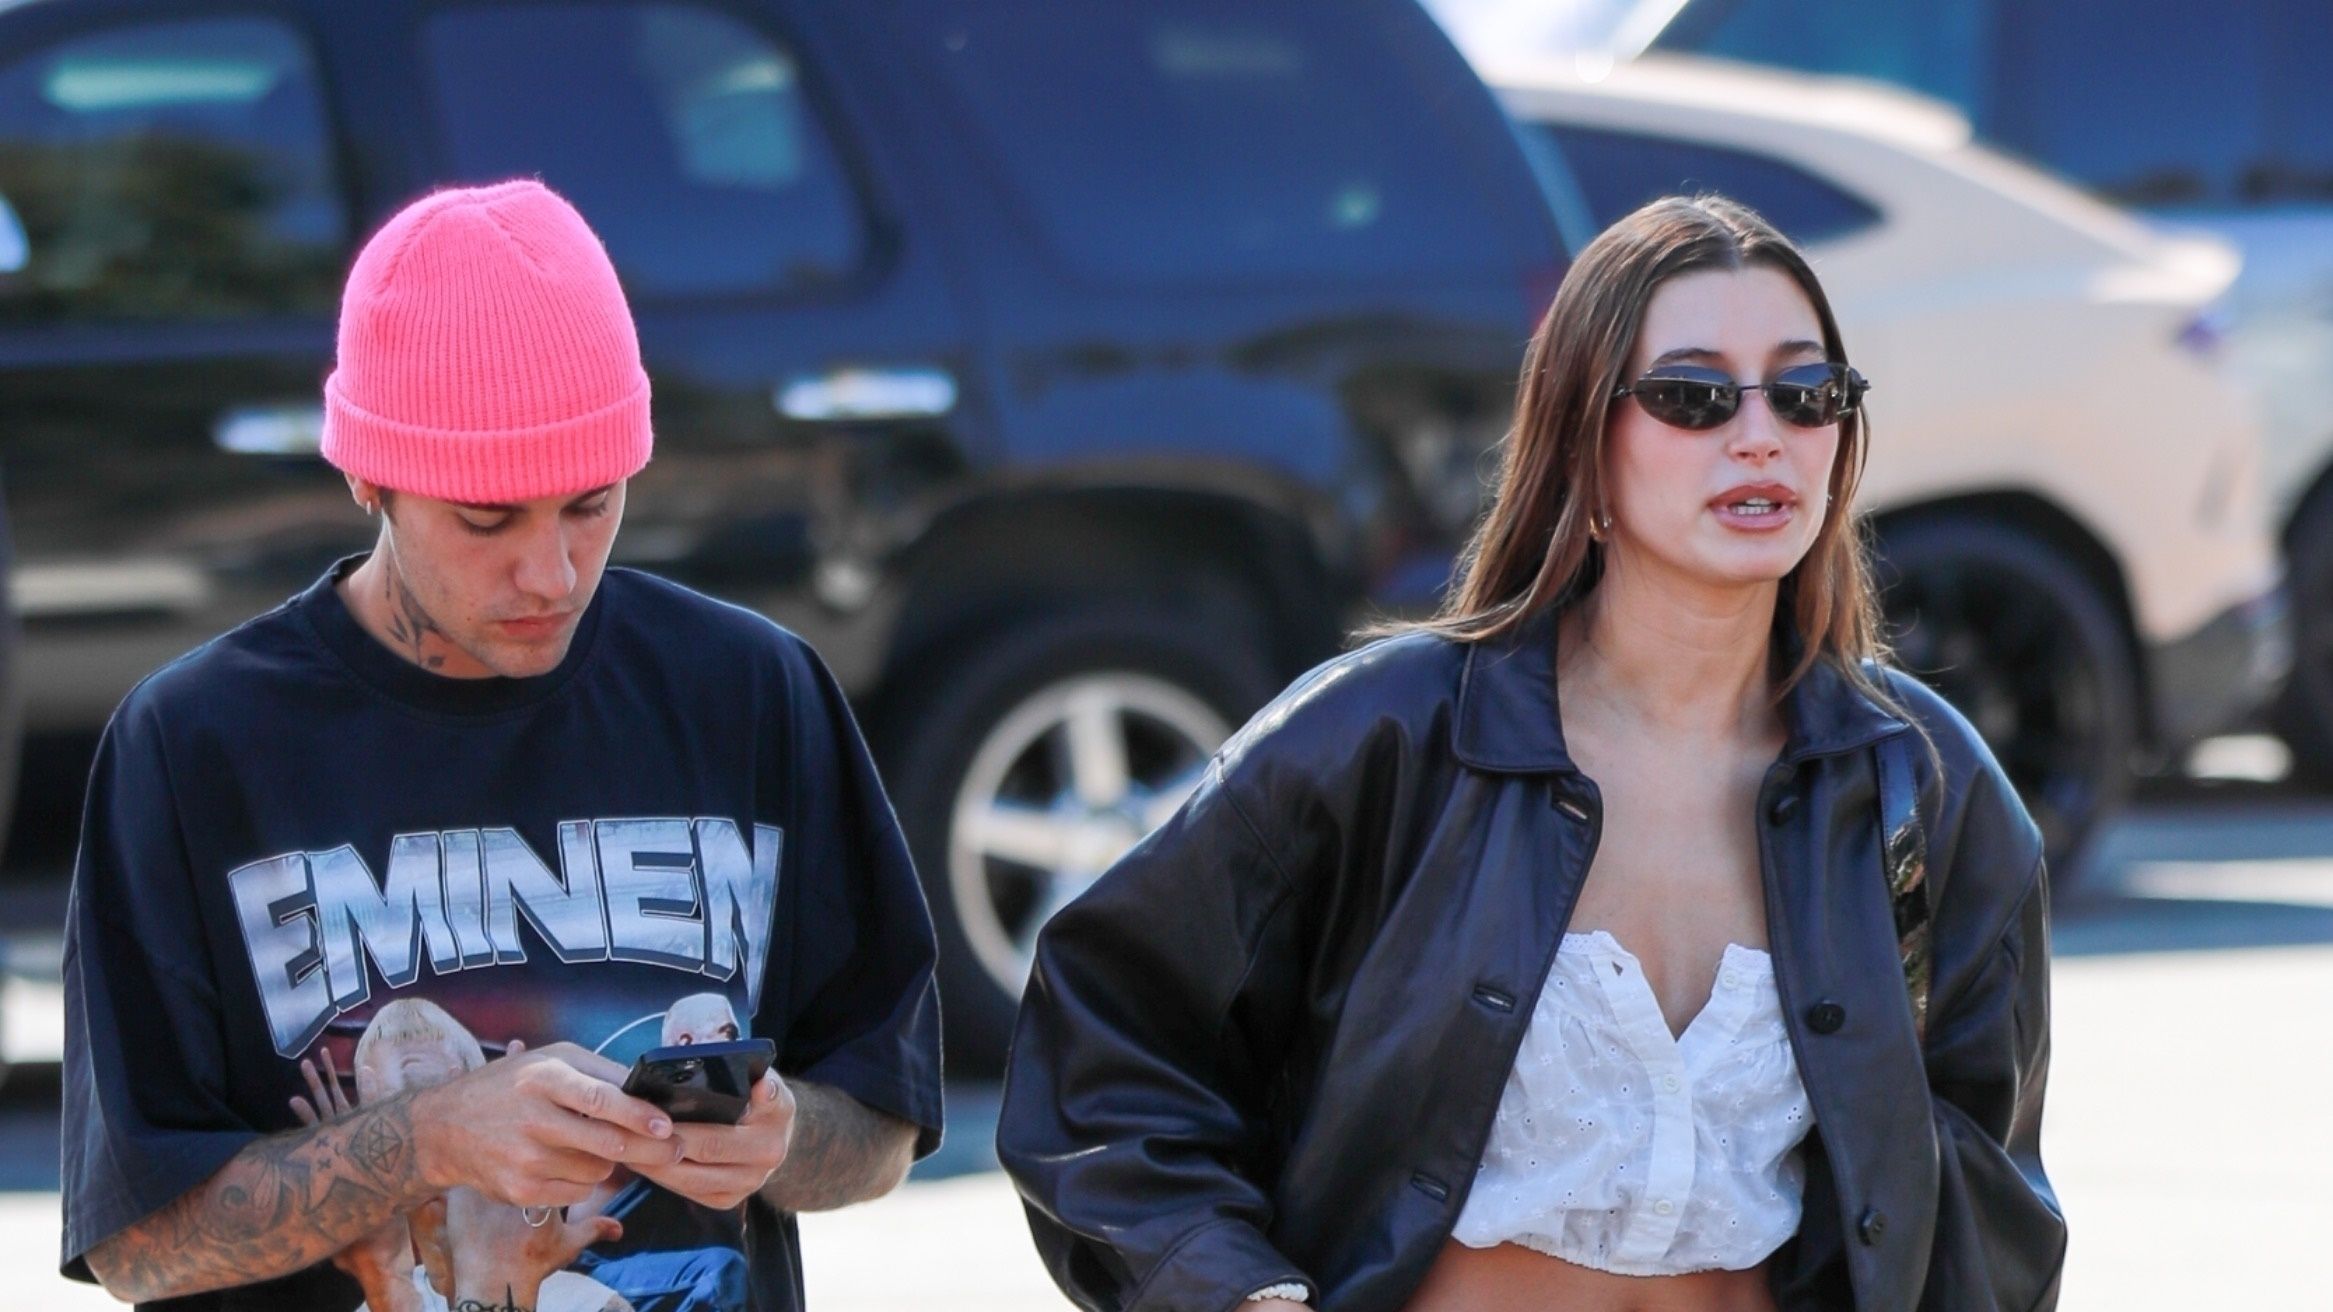 Hailey Bieber Shows Us How To Rock The Baggy Jeans And Small Top